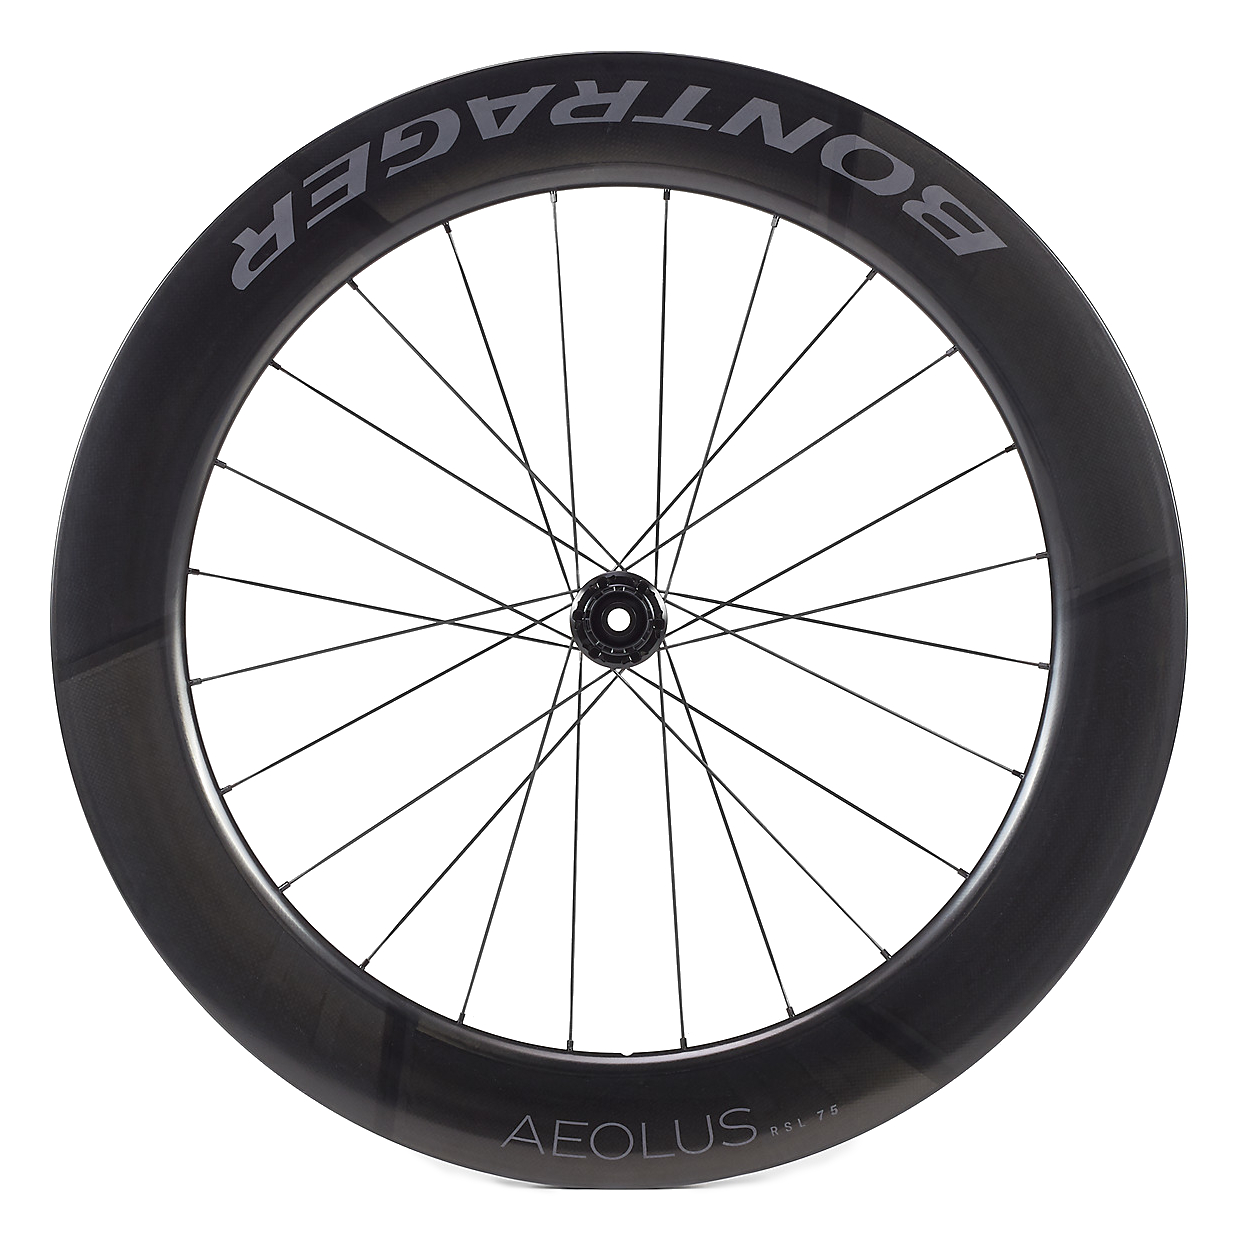 Picture of Bontrager Aeolus RSL 75 TLR Disc Carbon Rear Wheel - Clincher / Tubeless - Centerlock - 12x142mm - Shimano HG